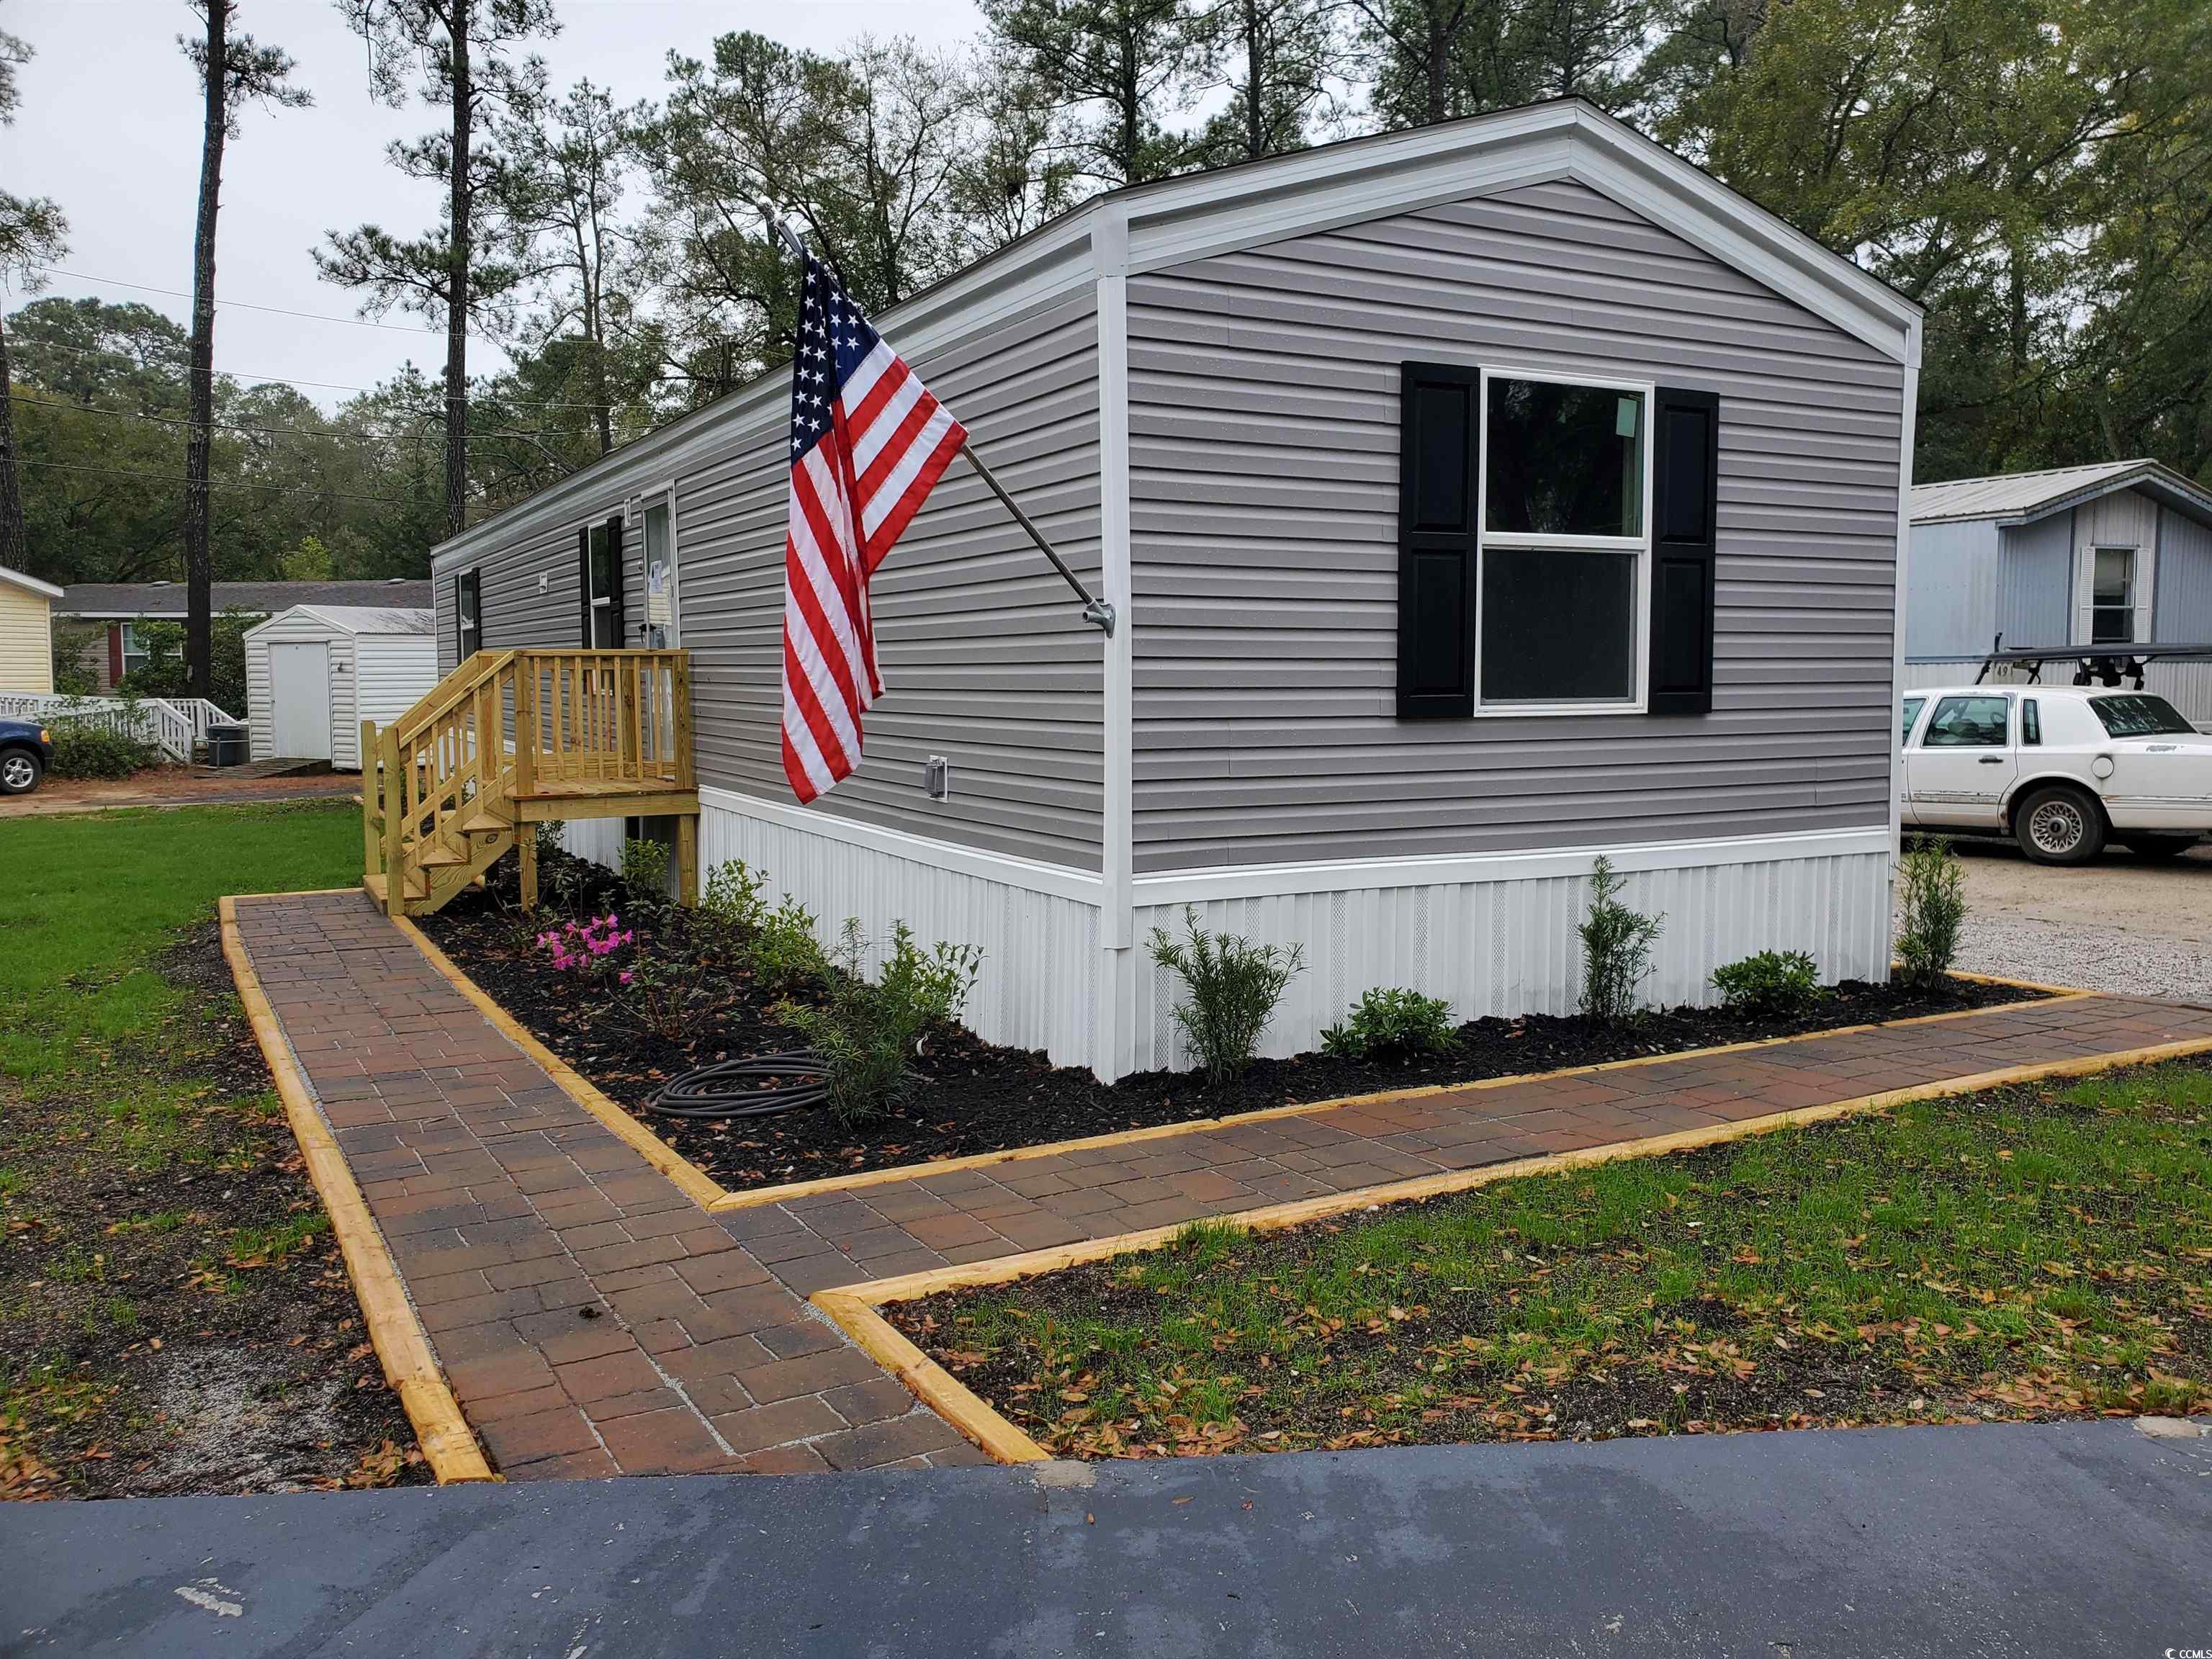 brand new home located on a corner lot.  home has new landscaping, walkway pavers, cement parking pad and a gravel driveway. this 14x66 clayton home elation model is an energy smart home for comfort and savings.